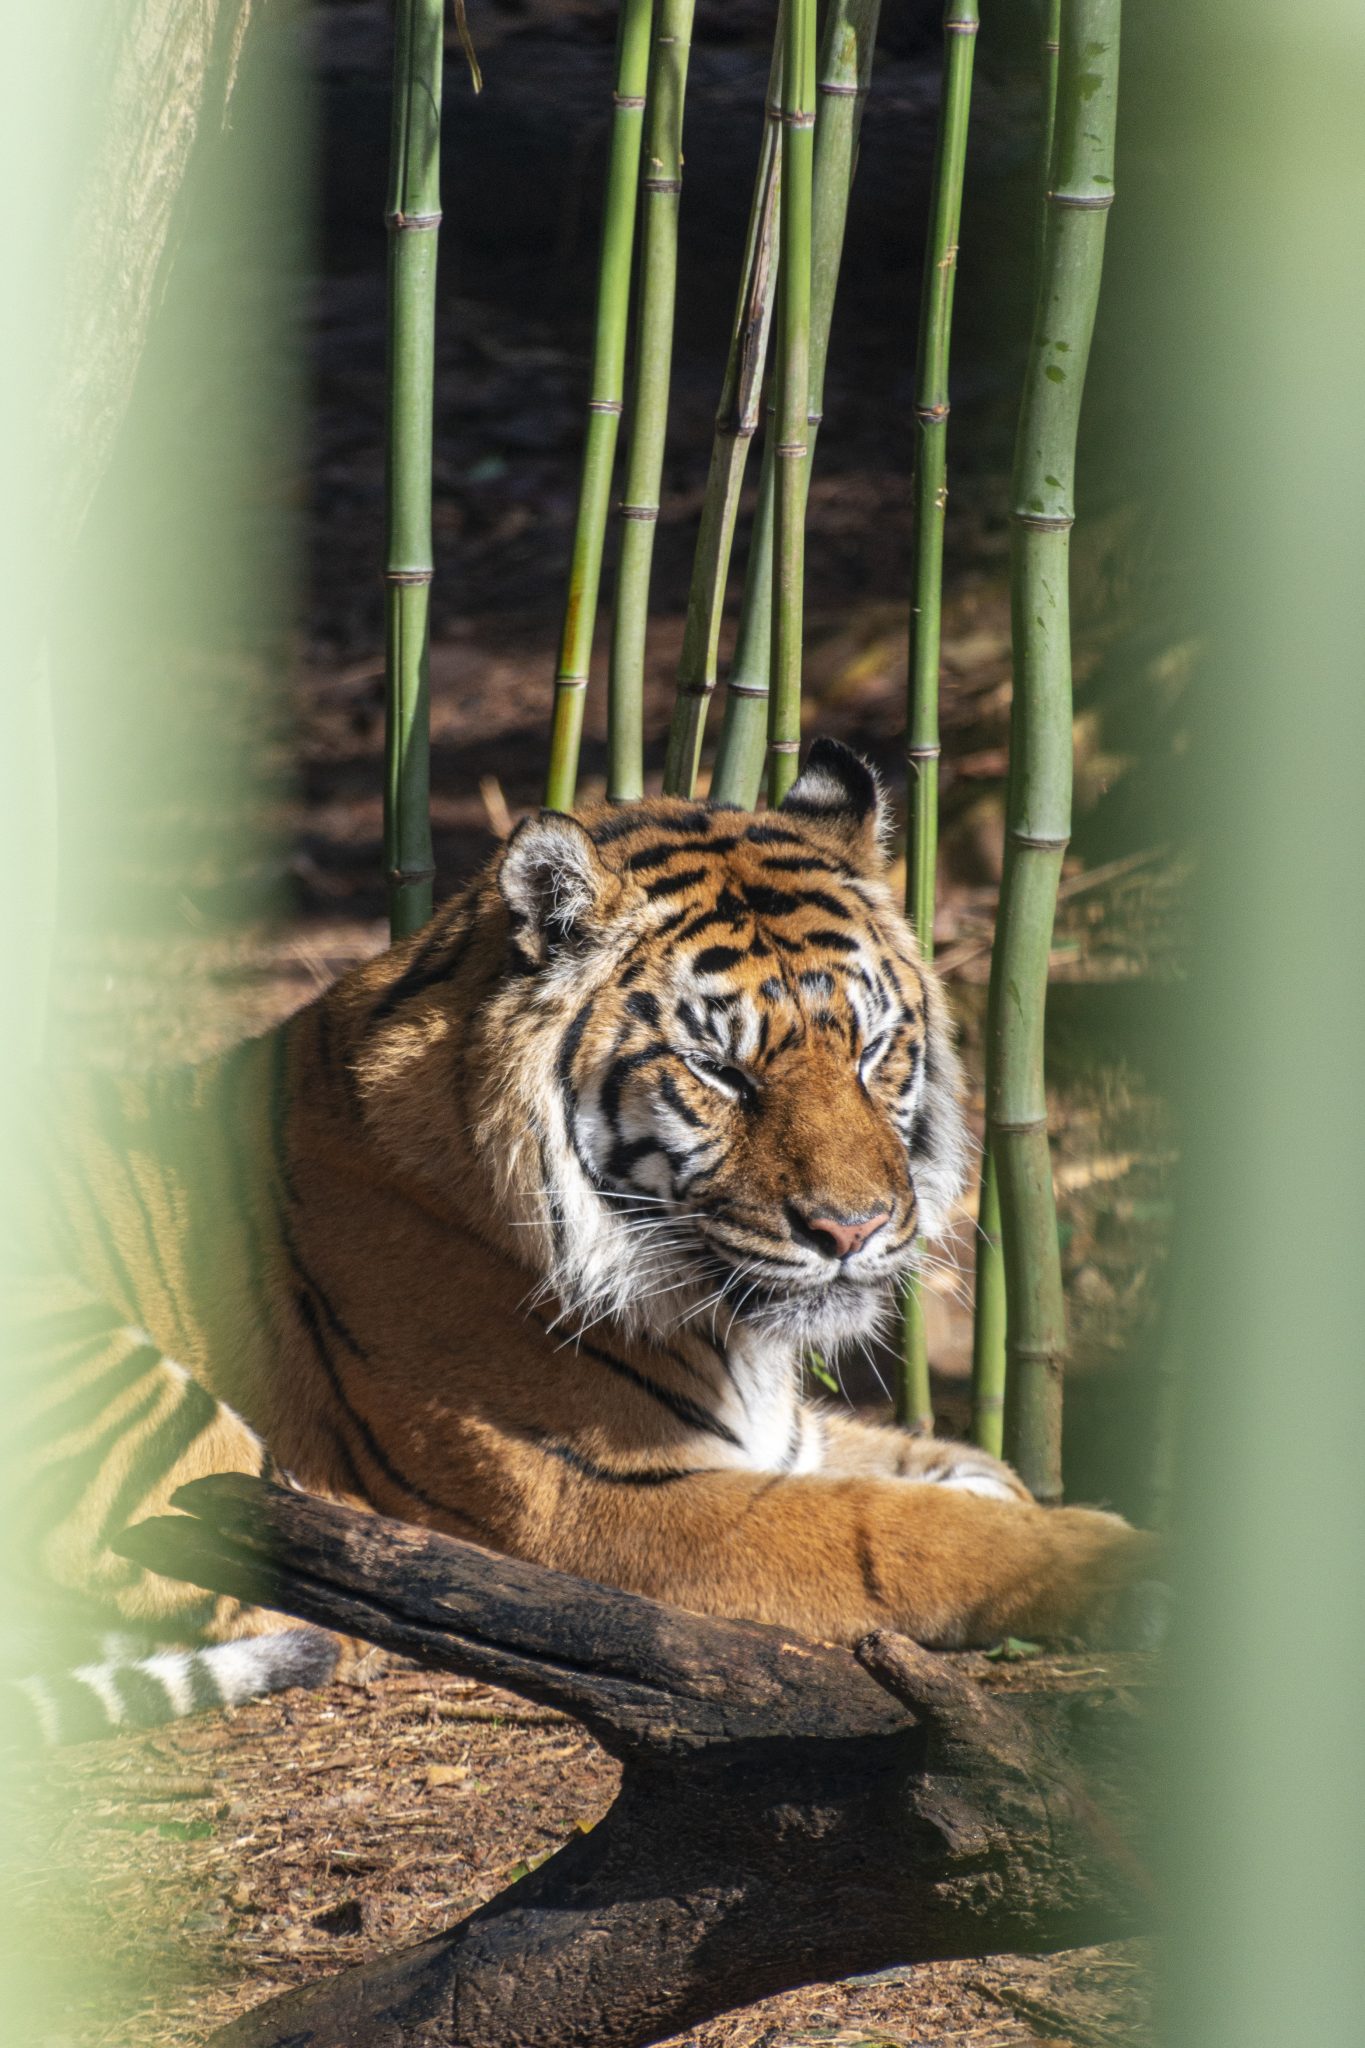 View of a tiger between bamboo stalks